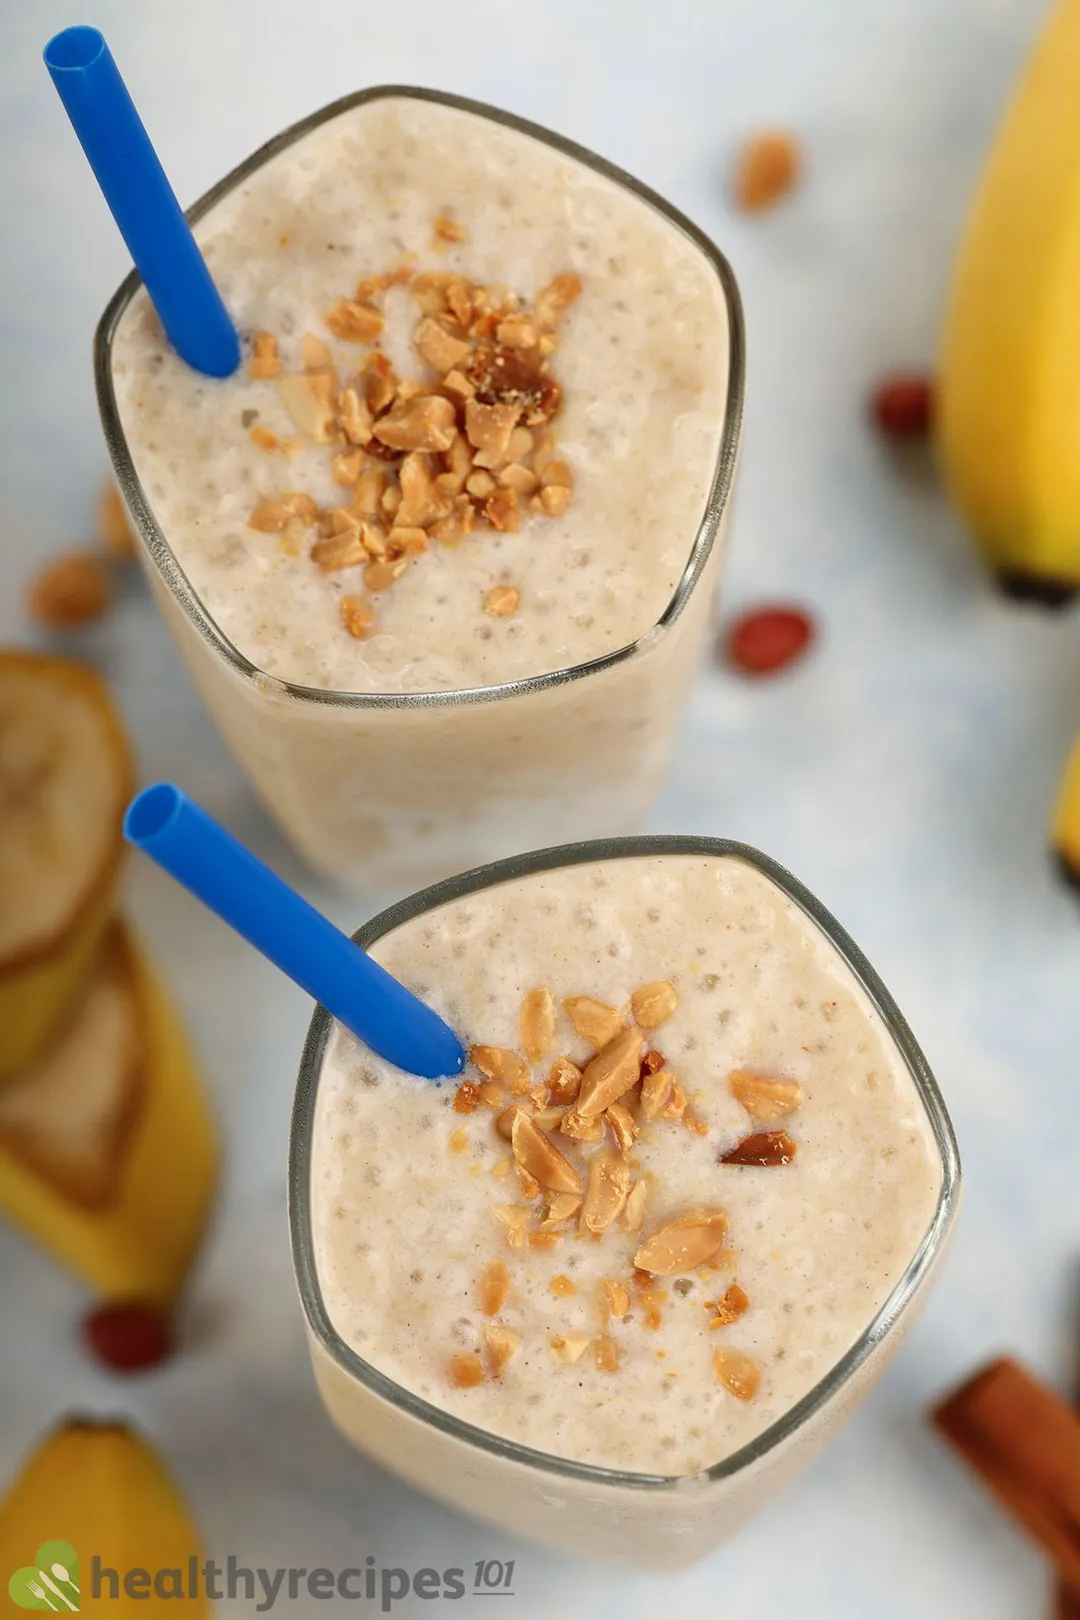 A high angle shot of two glasses of Peanut Butter Banana Smoothie, surrounded by bananas and roasted peanuts.